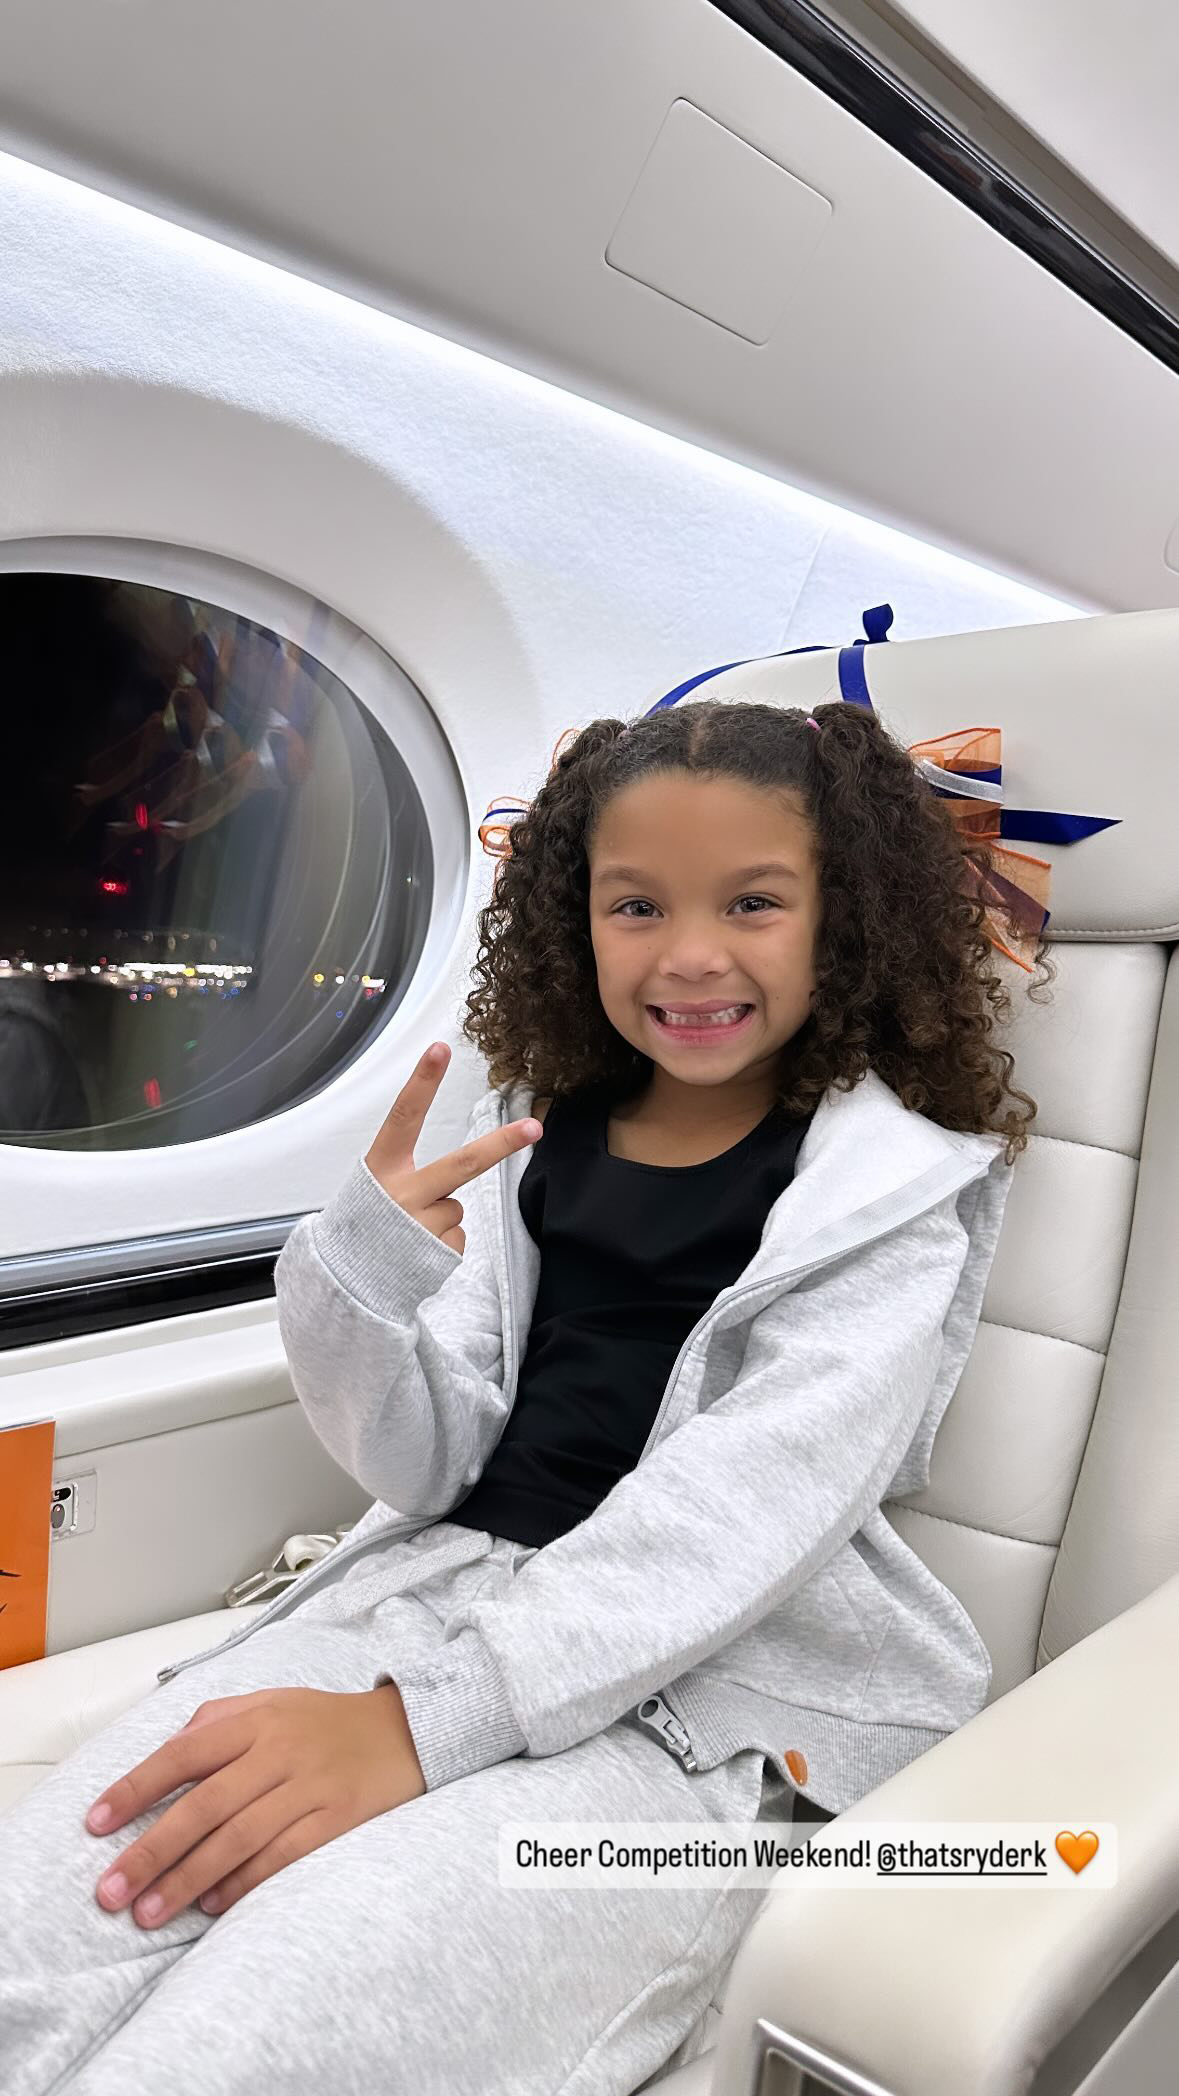 She shared photos and videos of her young daughter, Ryder, taking her first ride on a private jet